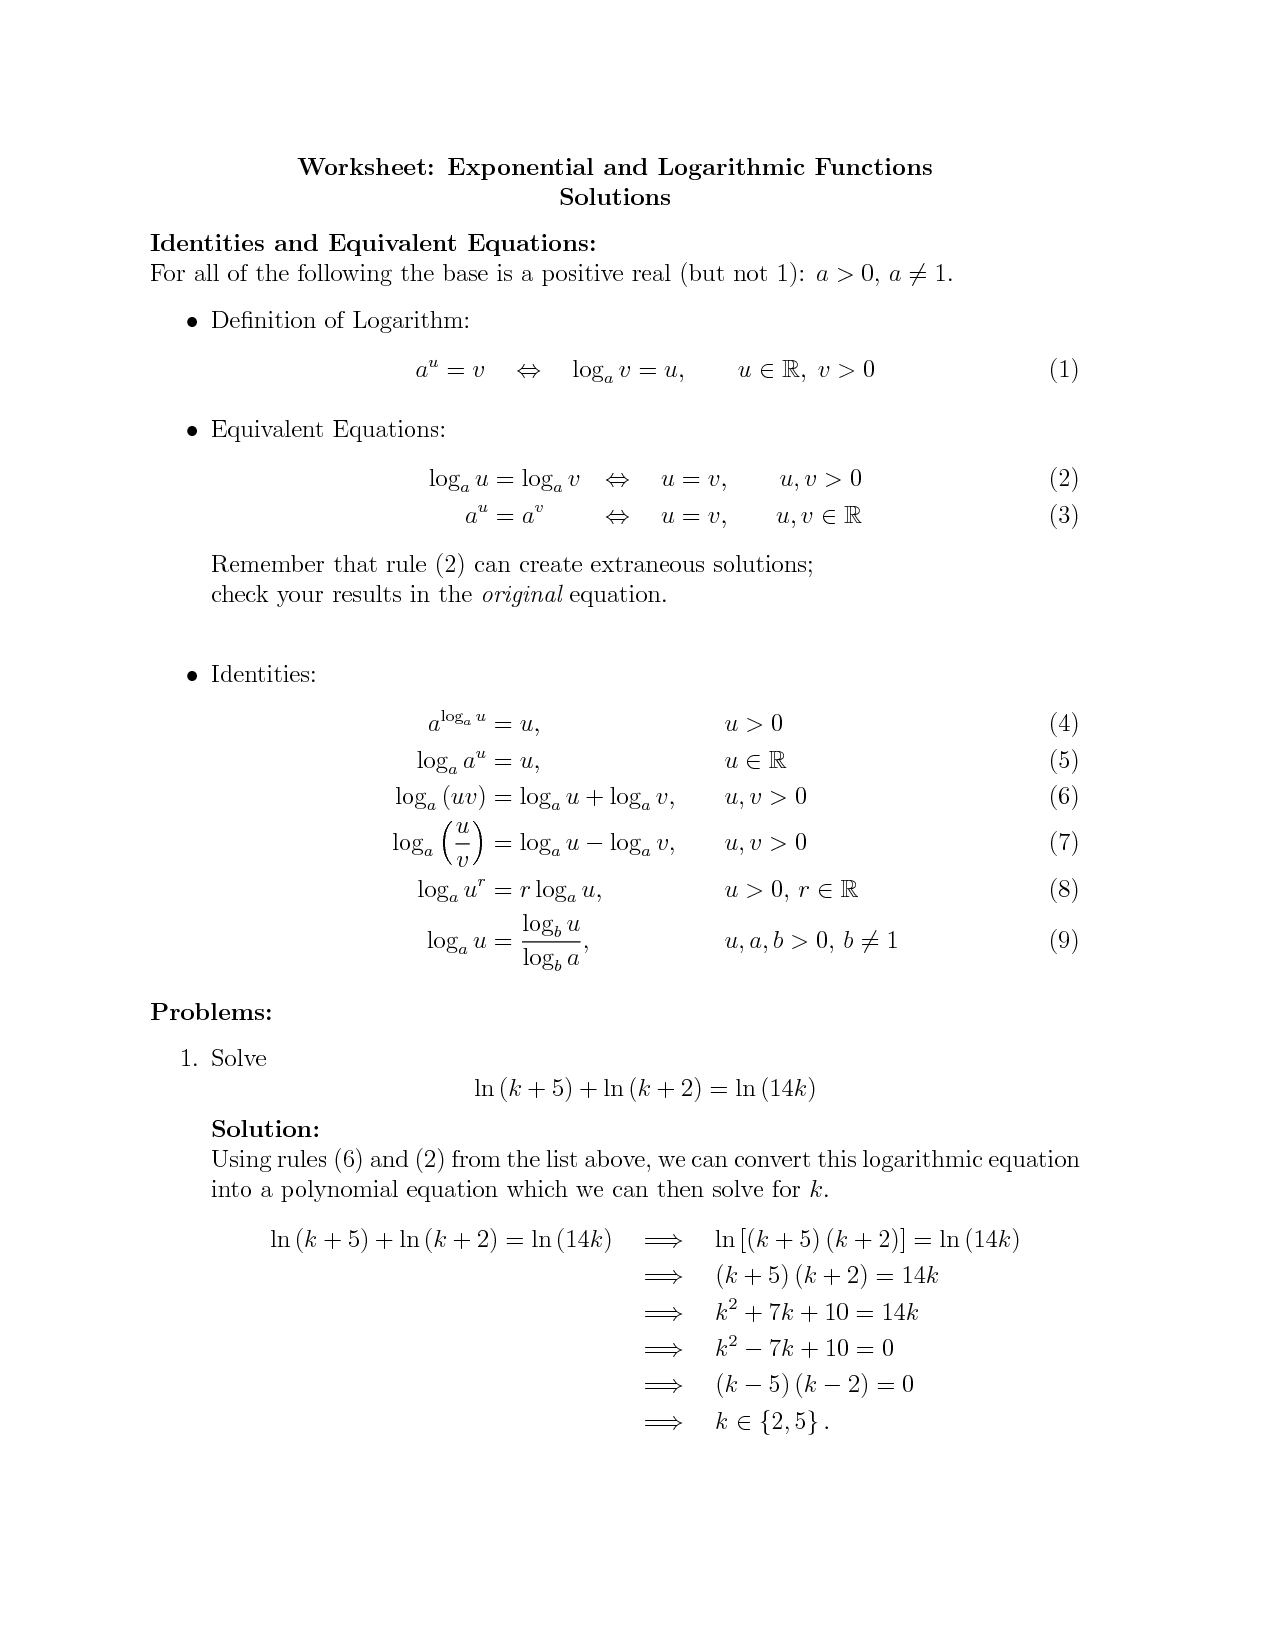 solving-logarithmic-equations-examples-solutions-worksheets-videos-activities